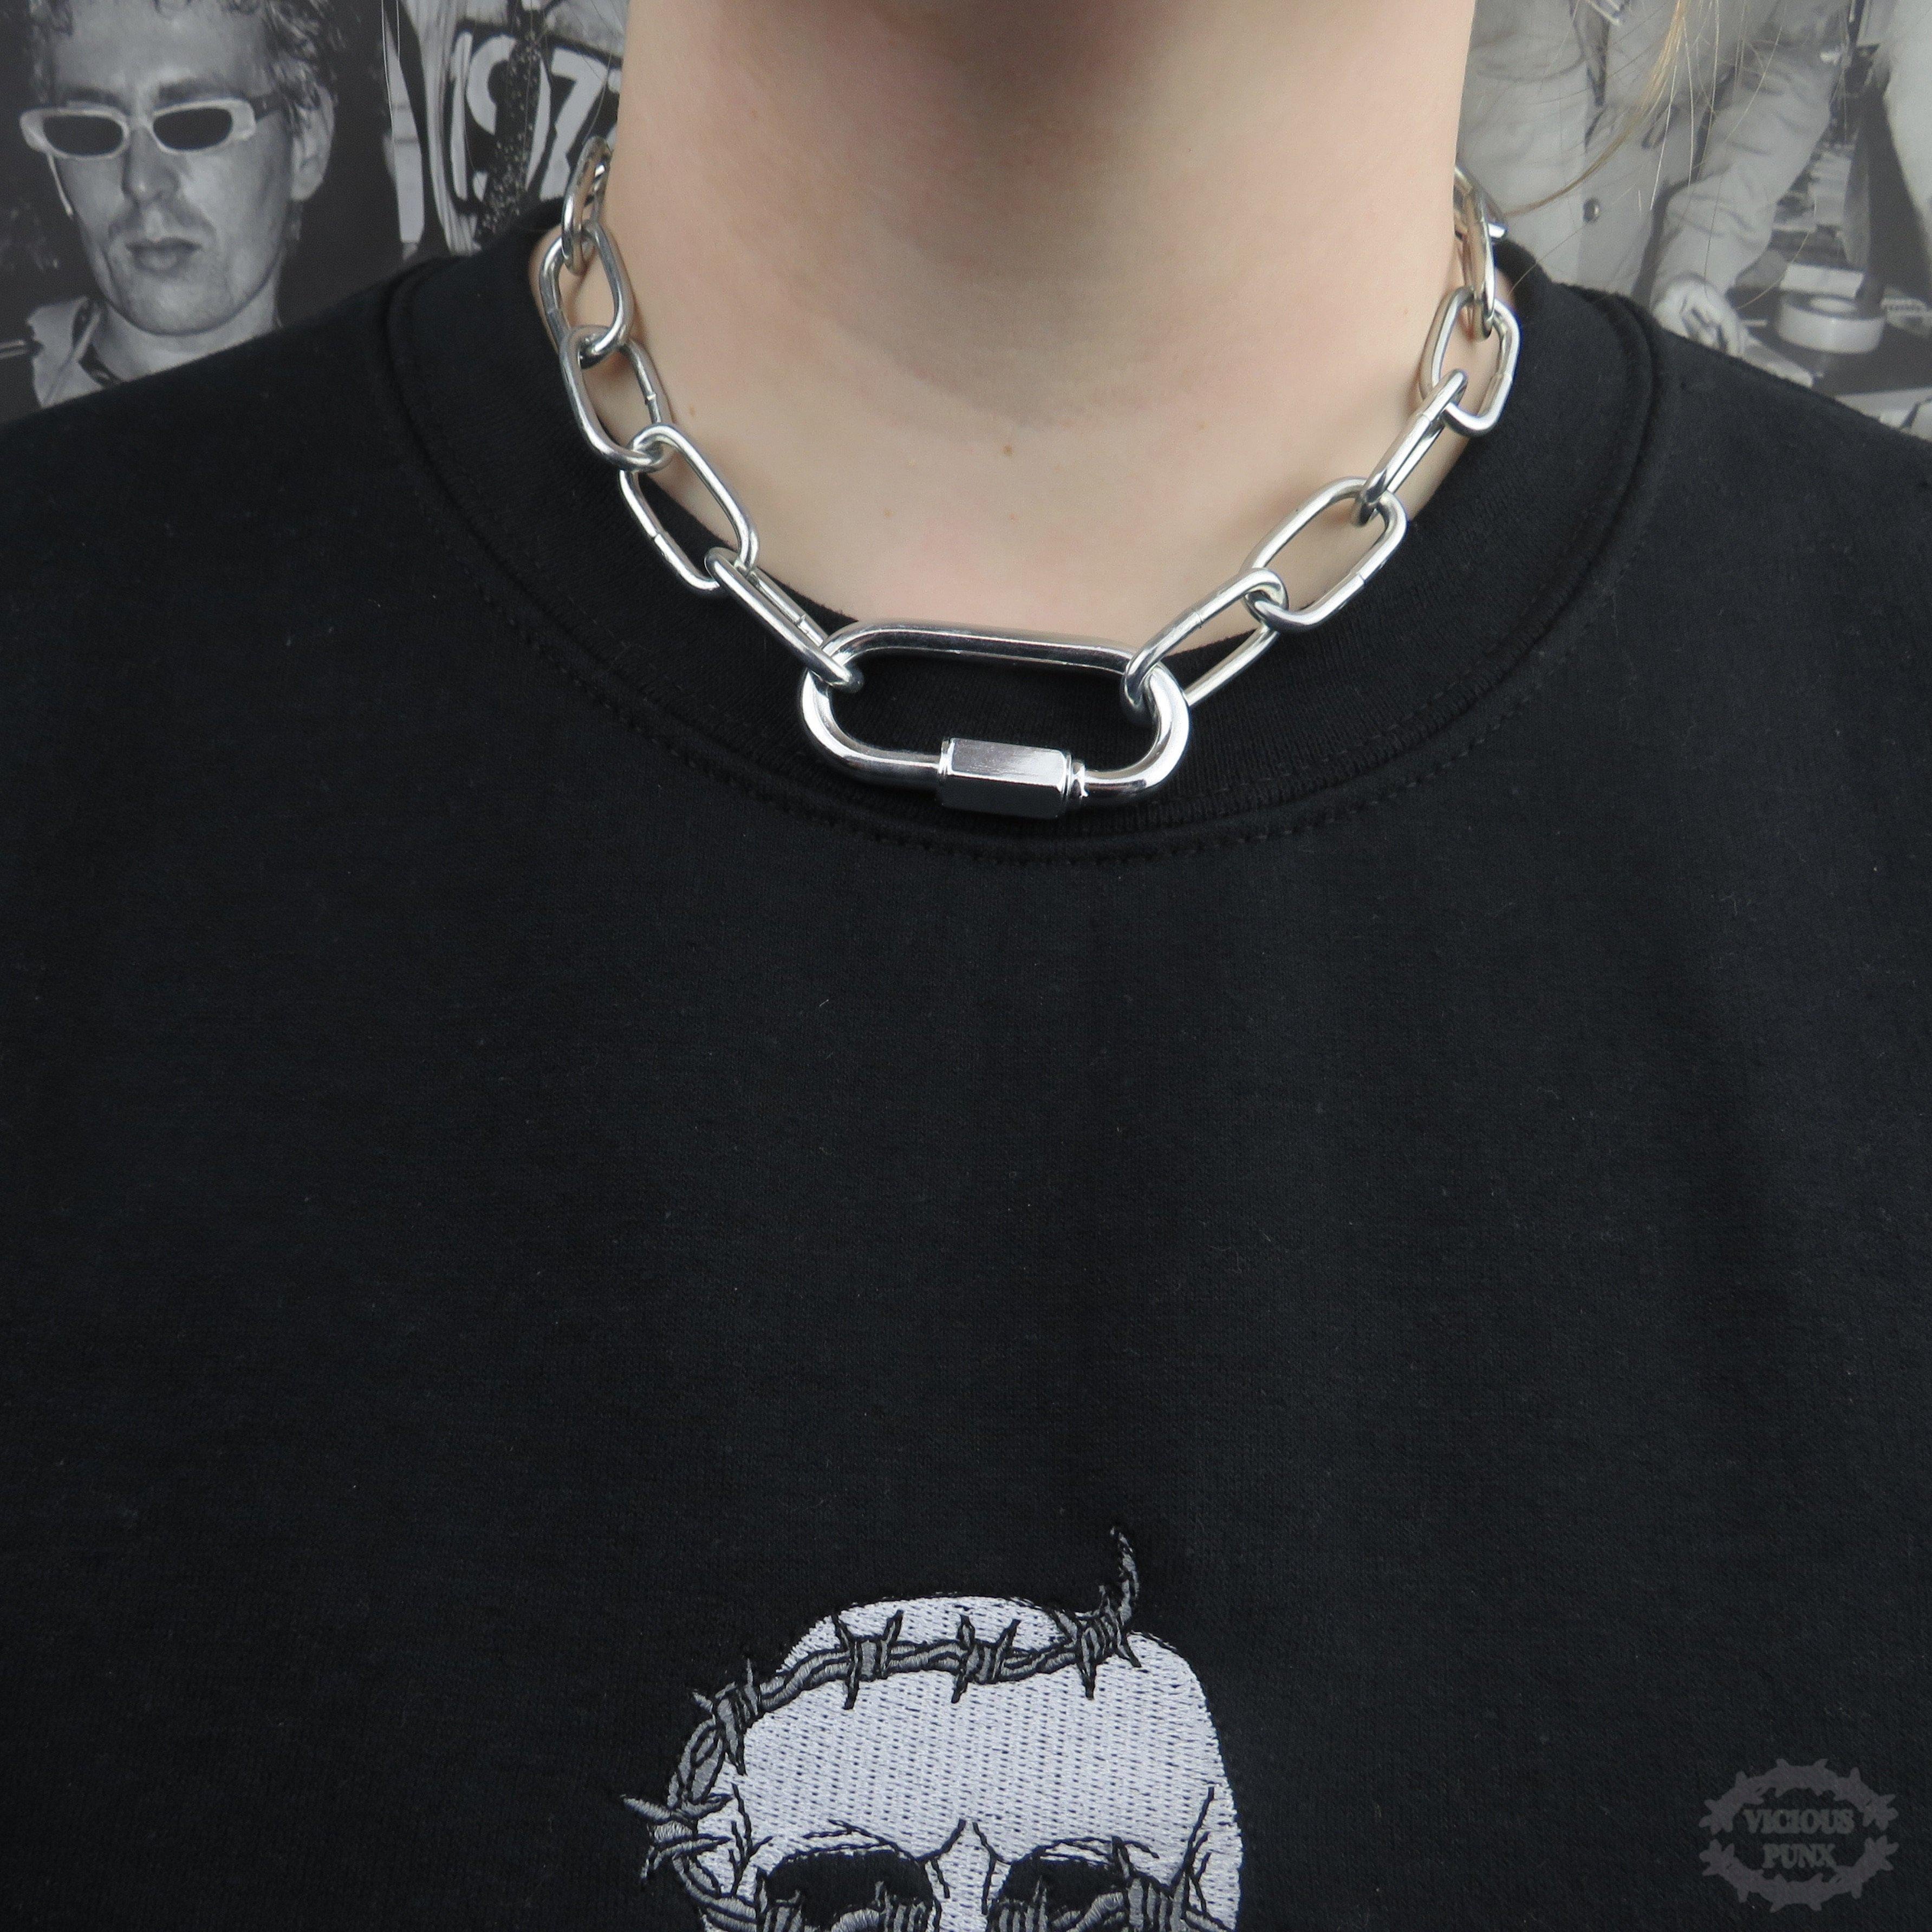 CARABINER LINK CHAIN NECKLACE – Vicious Punx